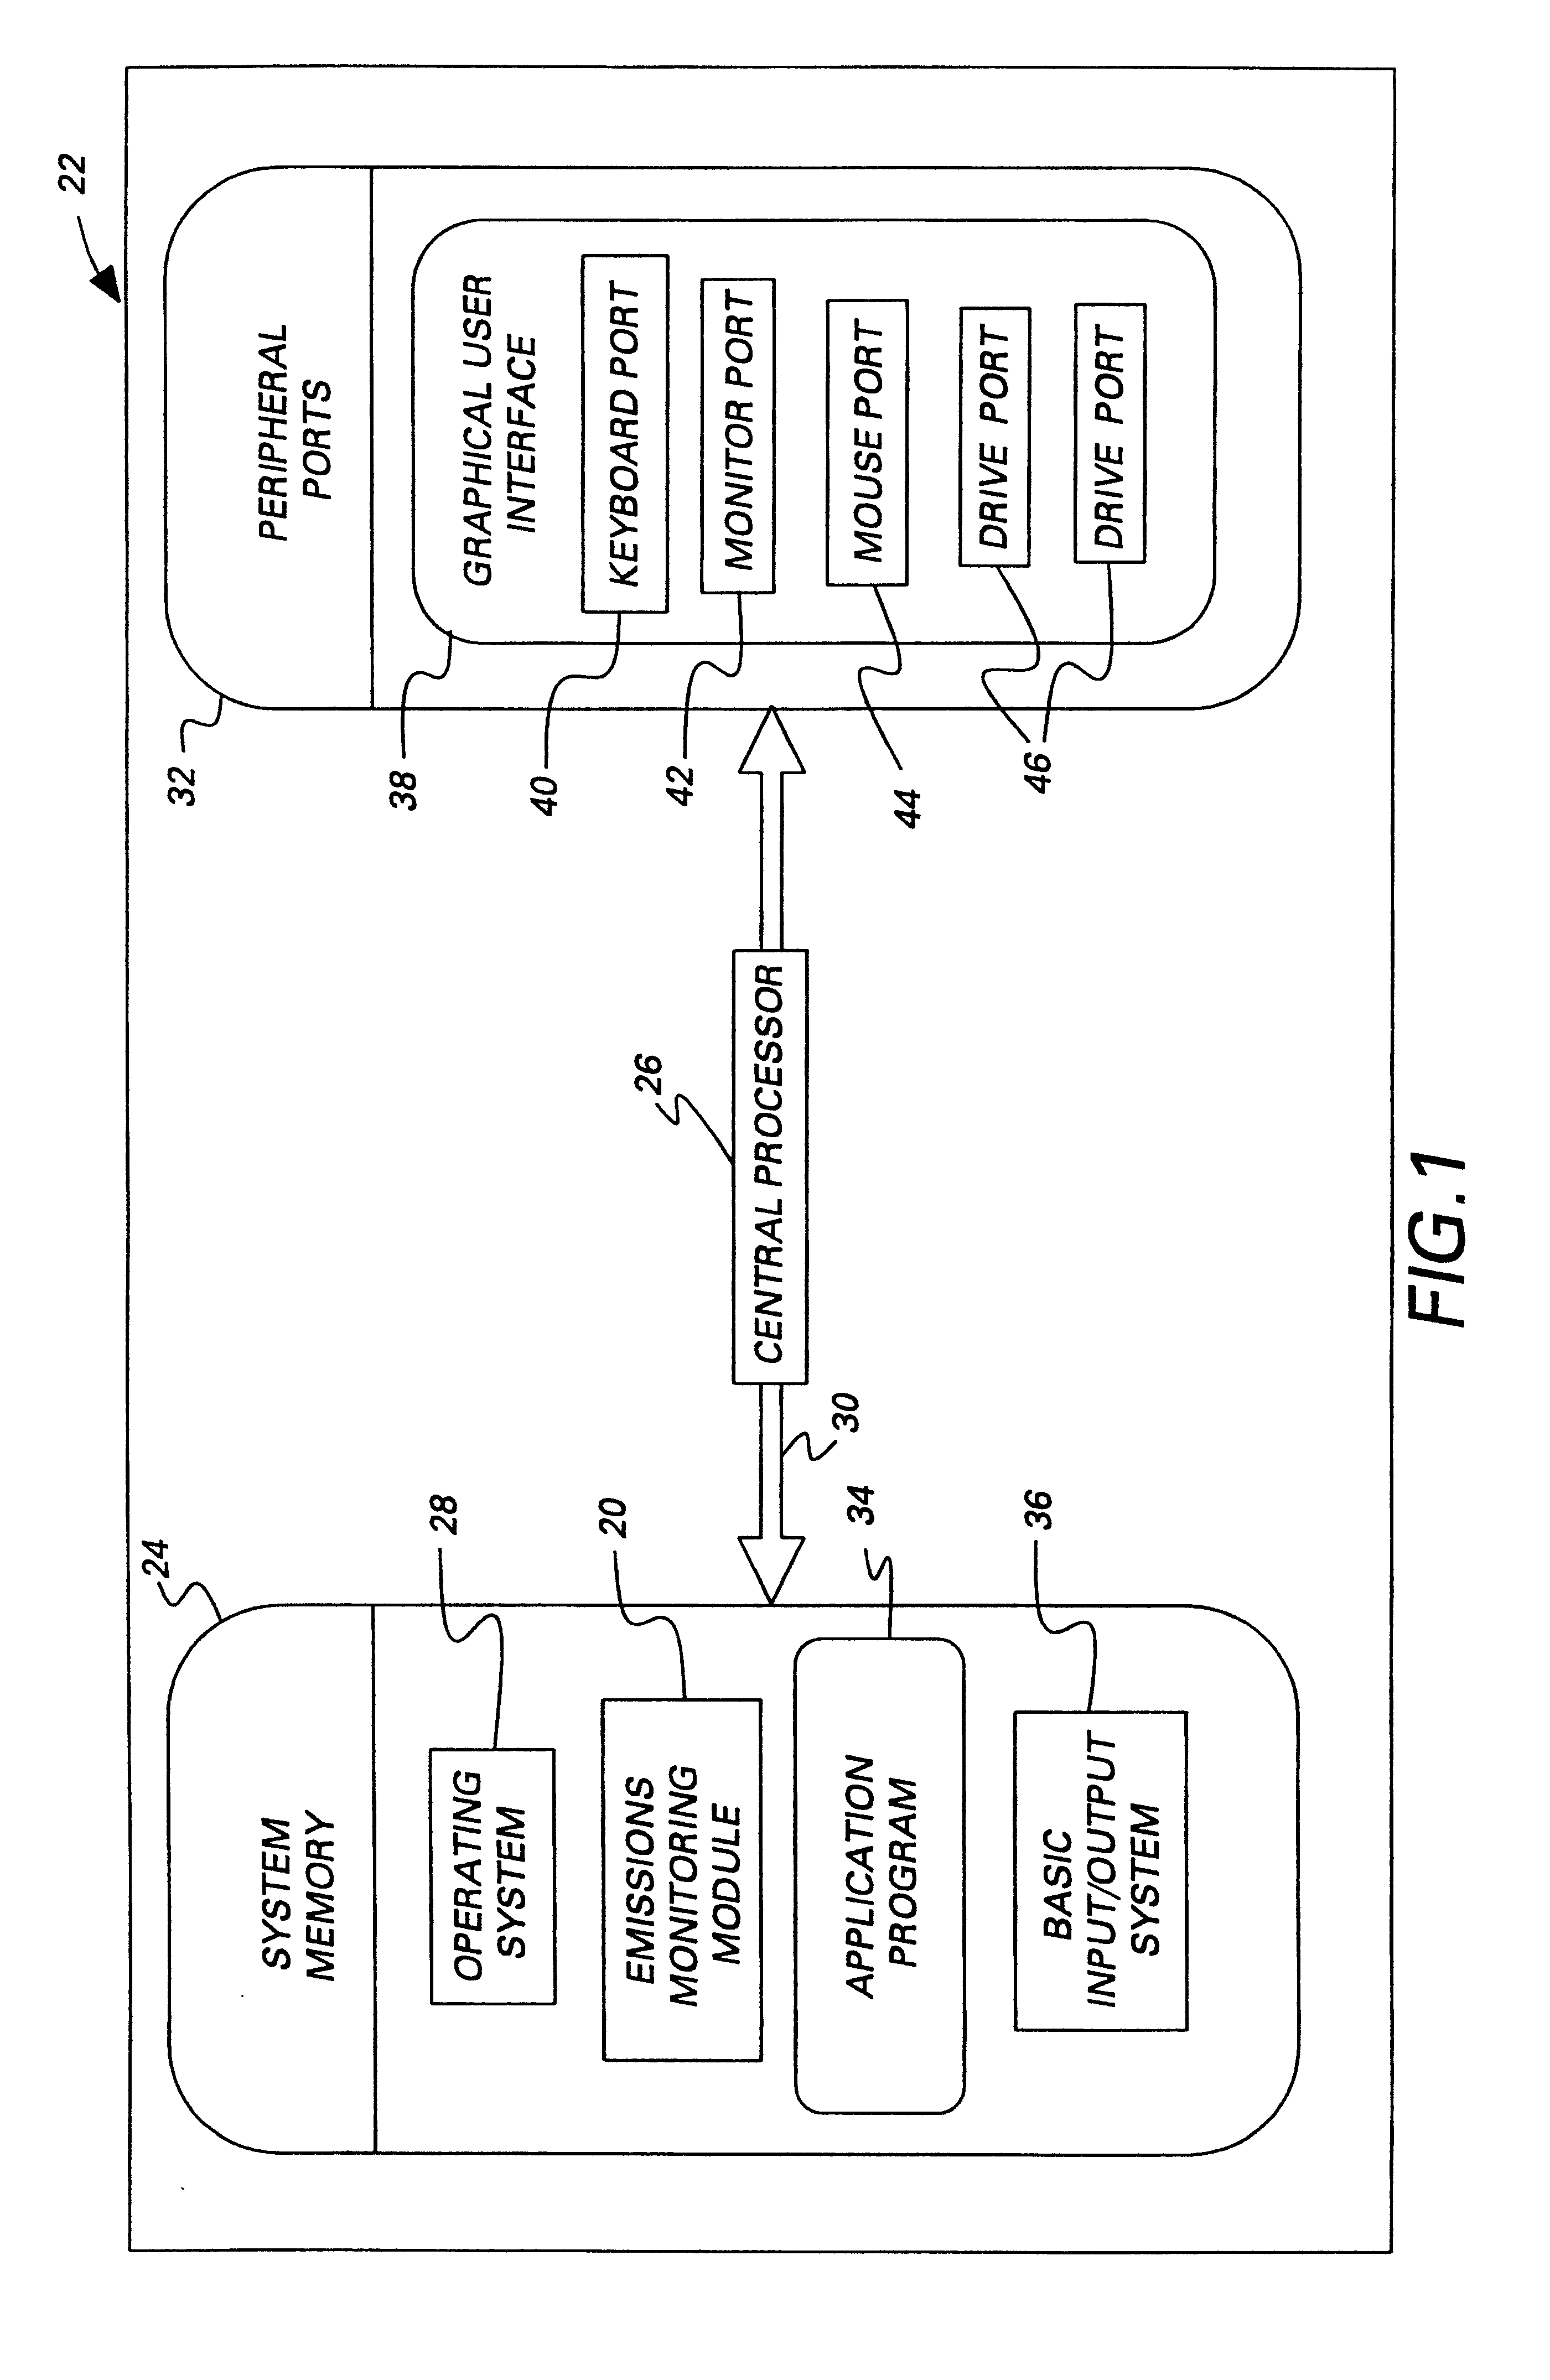 Methods and systems for energy and emissions monitoring